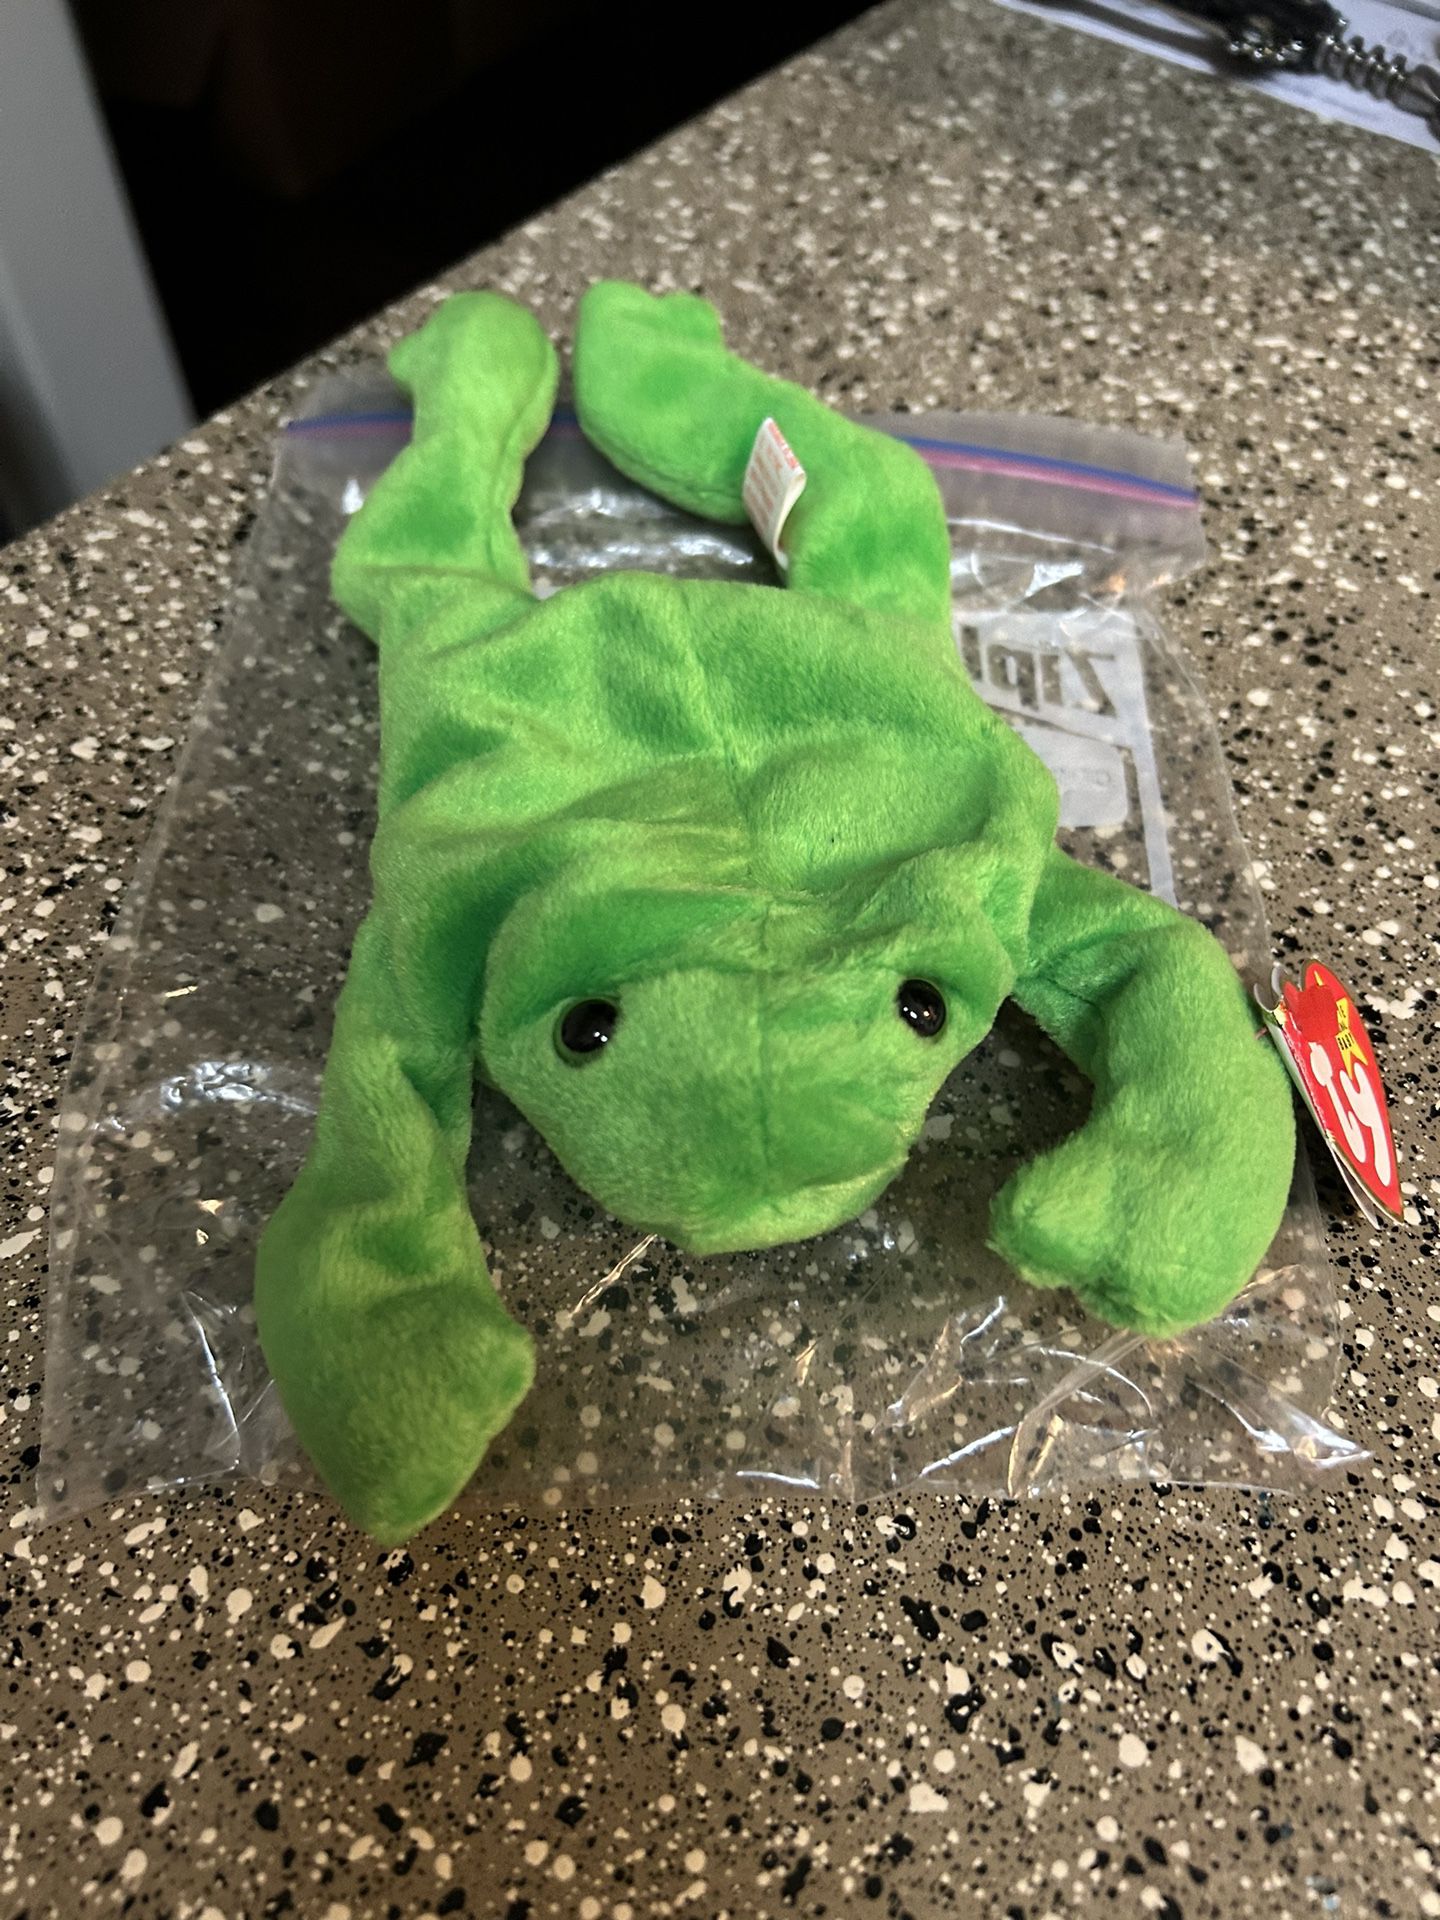 1993 Legs The Frog Beanie Baby- One Of The Original 9